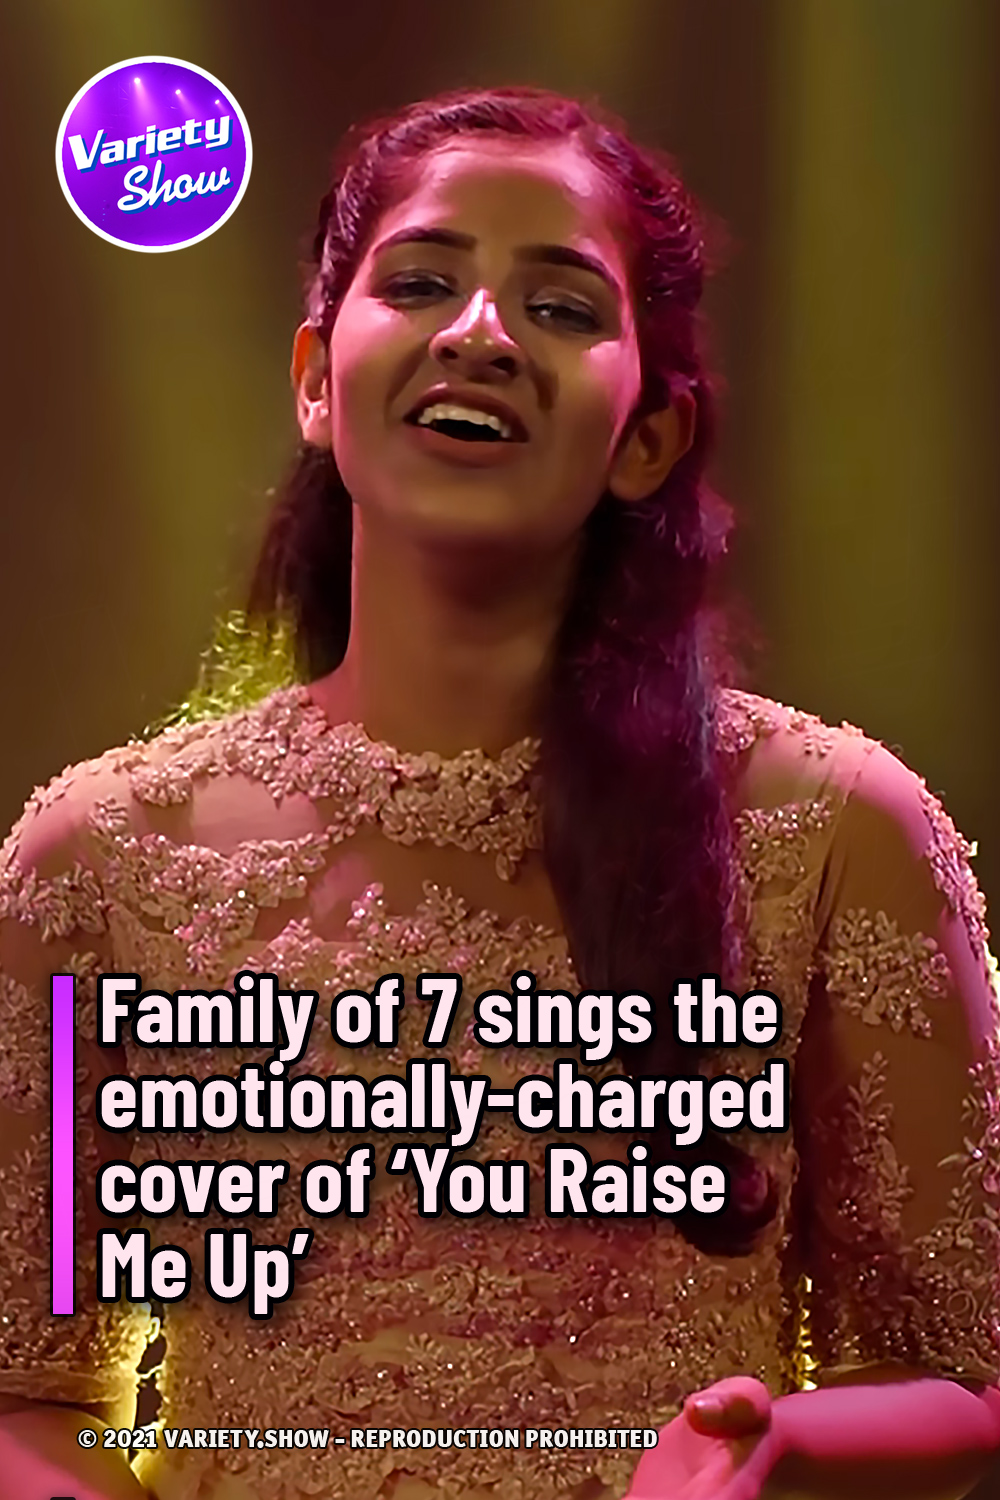 Family of 7 sings the emotionally-charged cover of ‘You Raise Me Up’